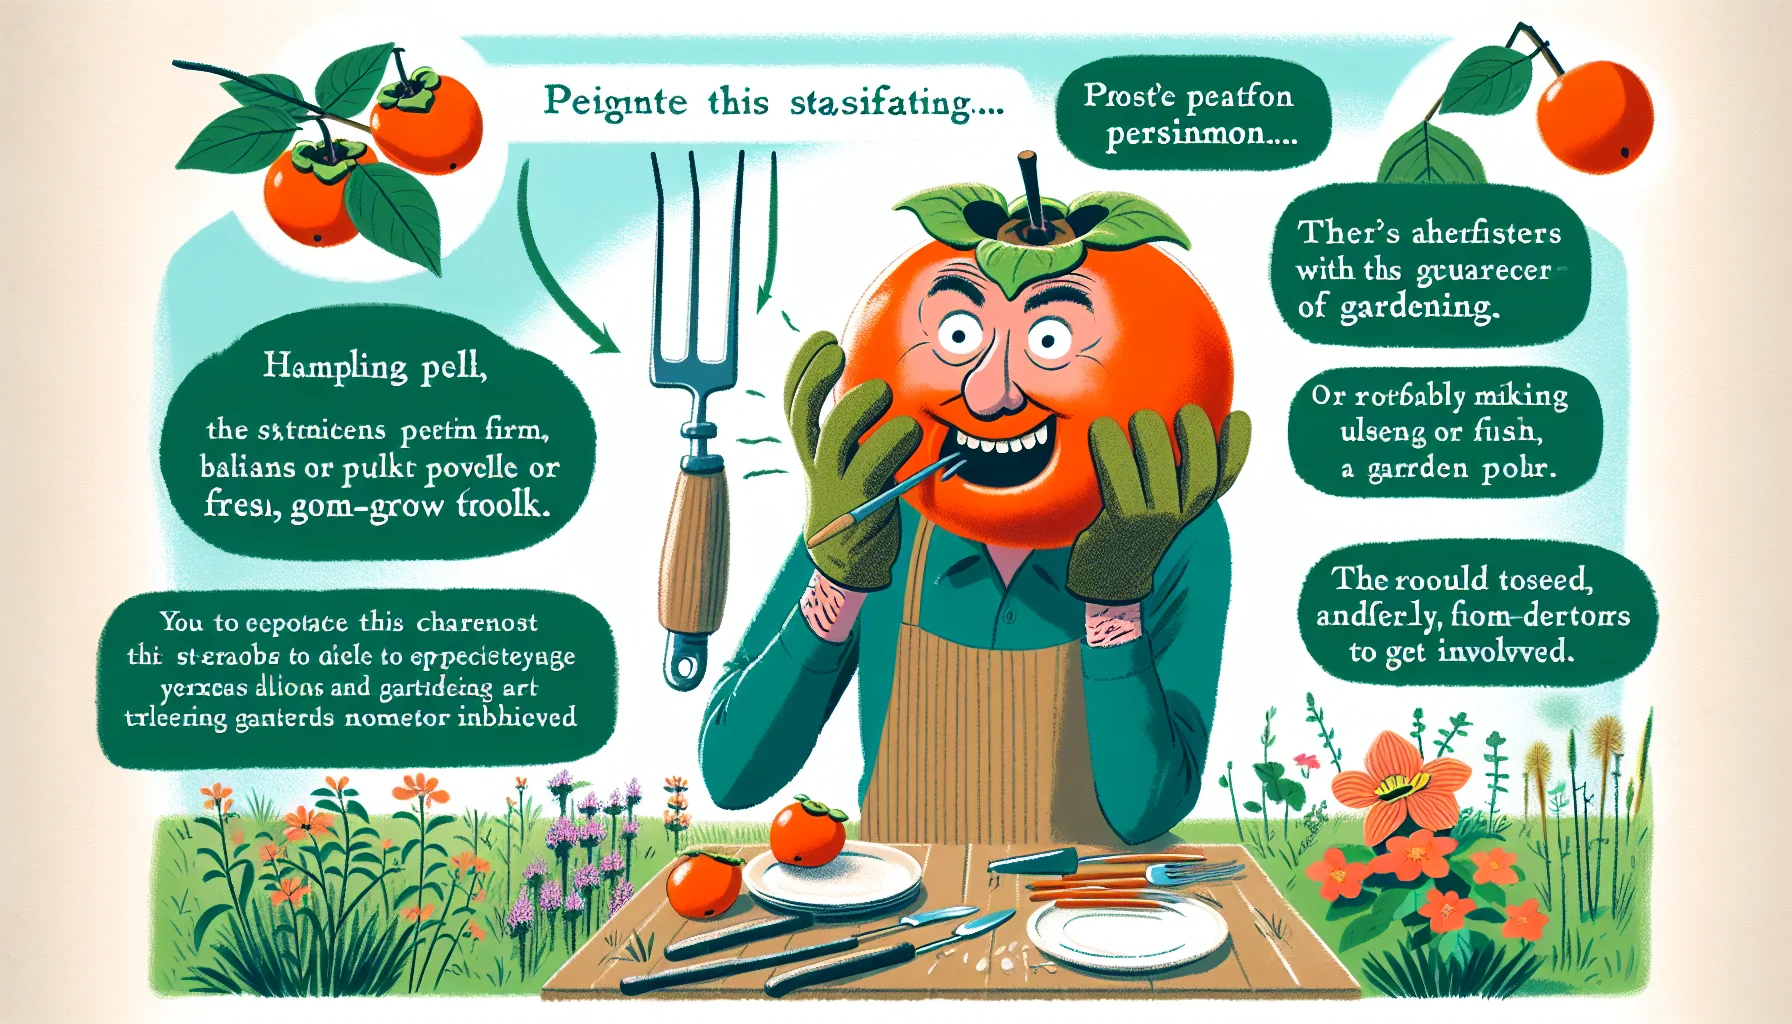 Design a real-life scene showing a humorous scenario in which a person is eating a ripe persimmon. The person is of Caucasian descent, has a whimsical approach to eating, probably using huge garden gloves or using a garden trowel as a fork, inadvertently creating a slapstick moment. The inclusion of green fields, various plants, flowering bushes and lots of sunlight should create a joyful environment signaling the appeal of gardening, with its guarantee of fresh, home-grown produce. The goal is to invite viewers to appreciate the charm and satisfactions of gardening and motivates them to get involved.